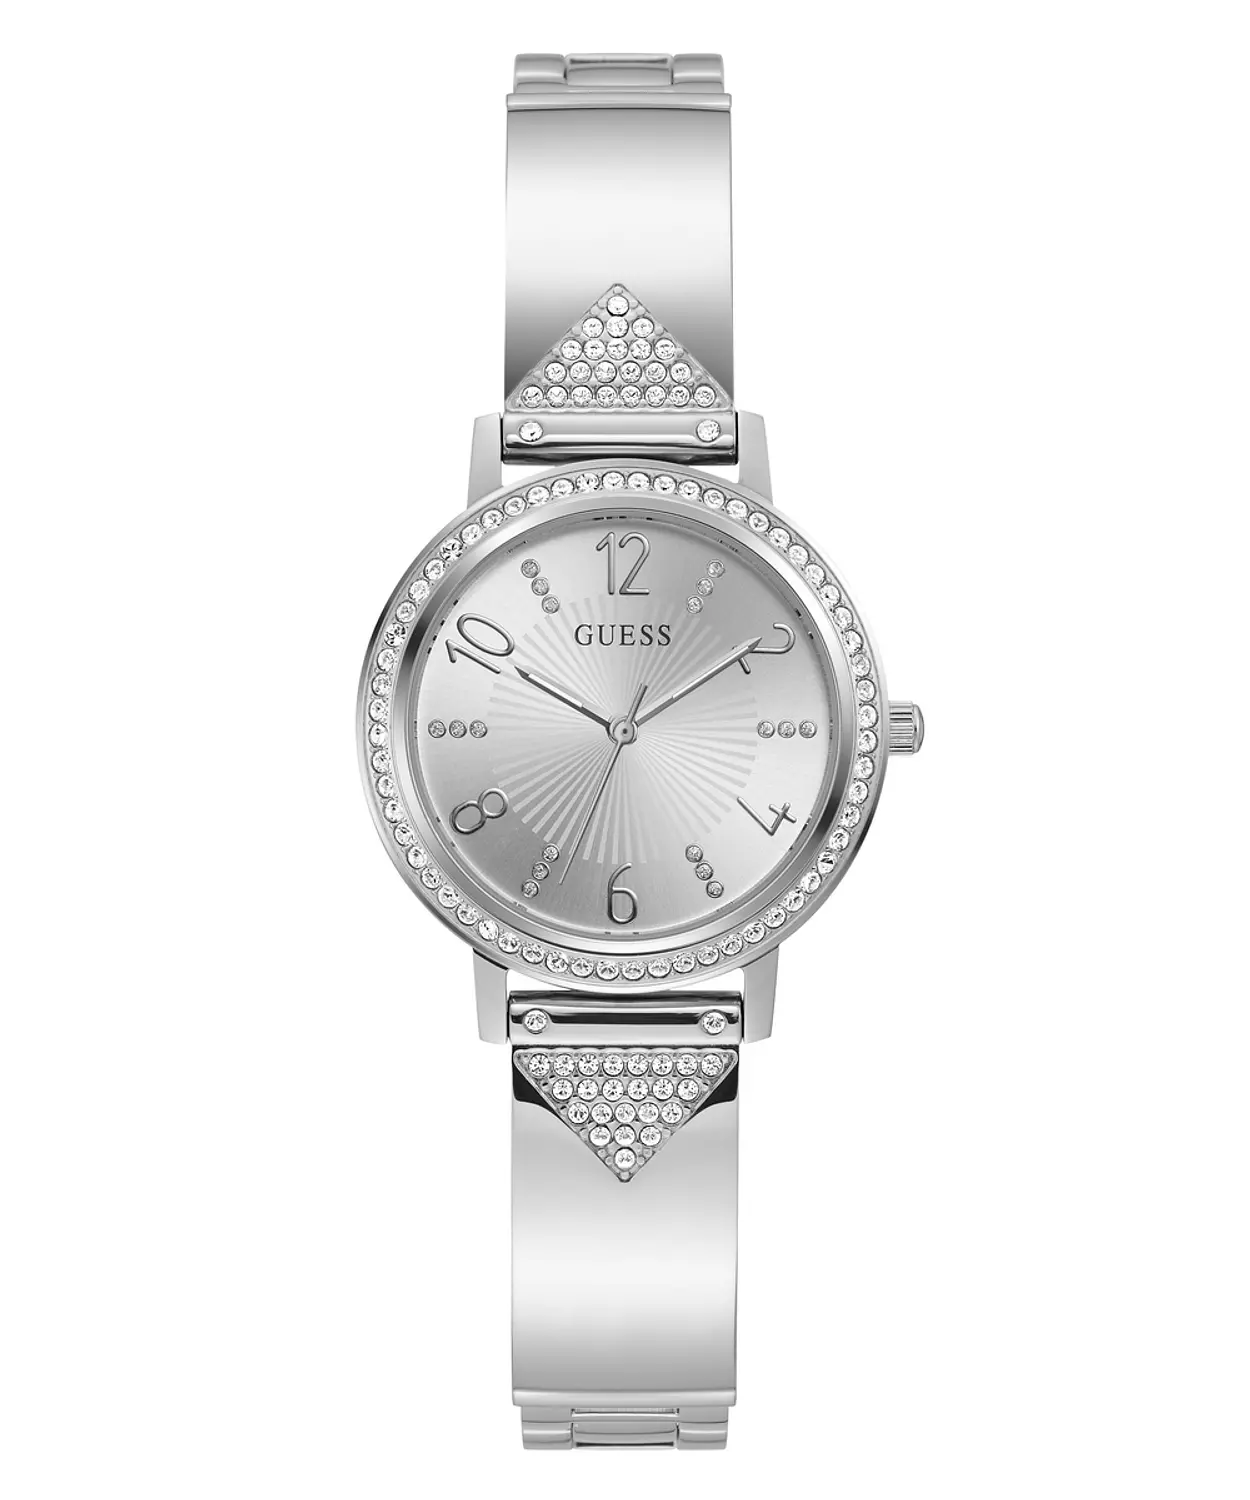 GUESS GW0474L1 ANALOG WATCH For Women Round Shape Silver Stainless Steel Polished Bracelet 0